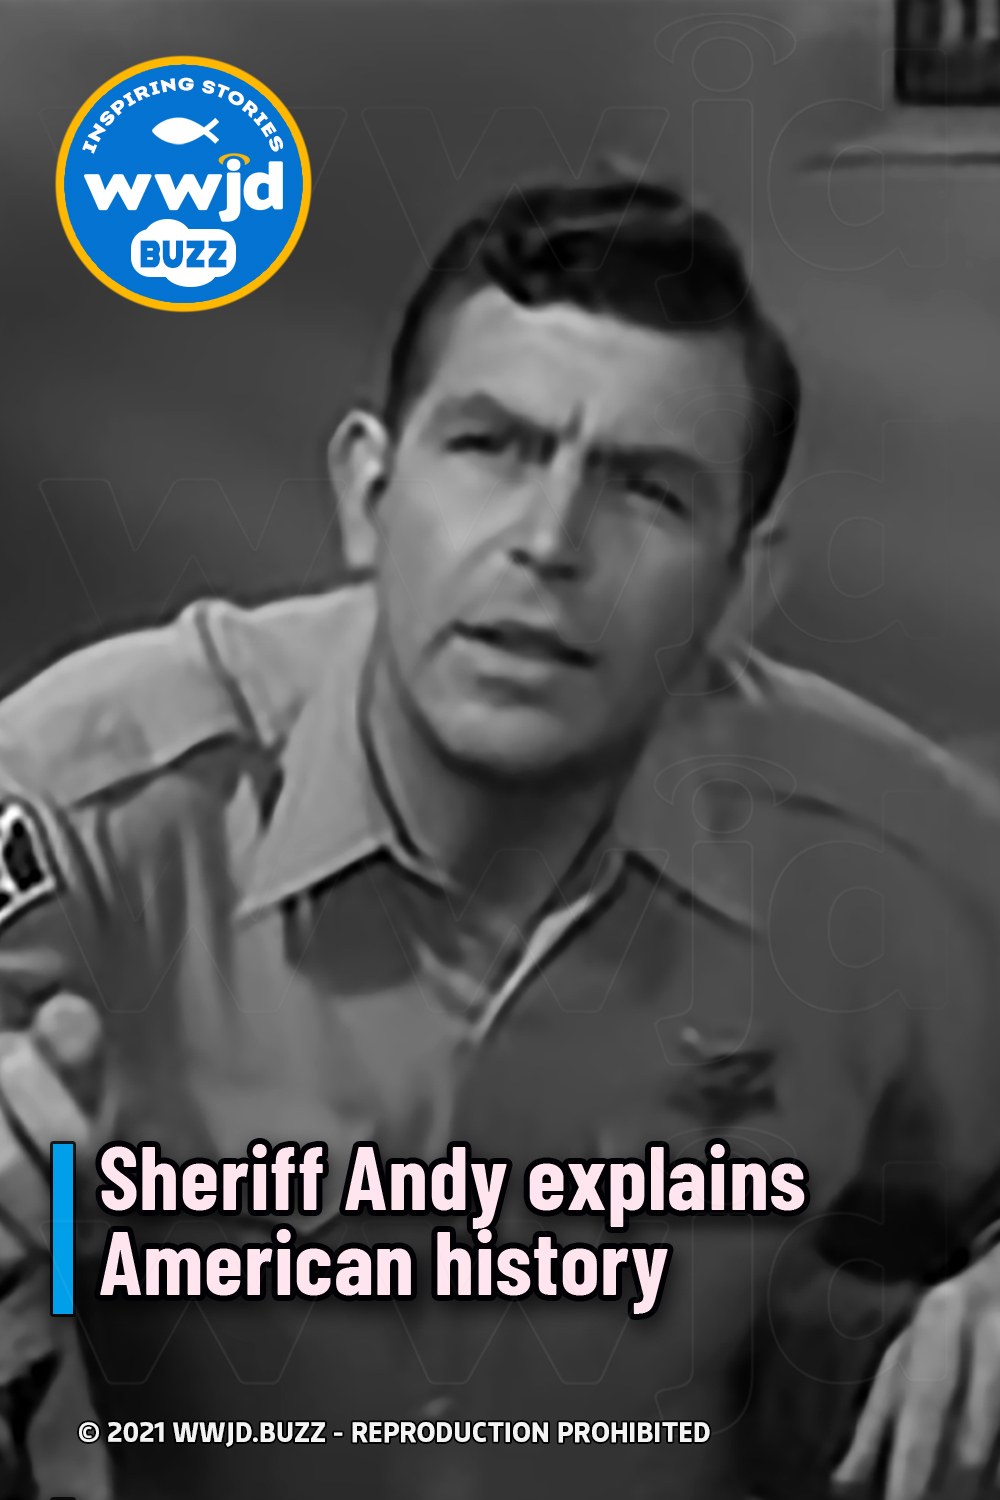 Sheriff Andy explains American history